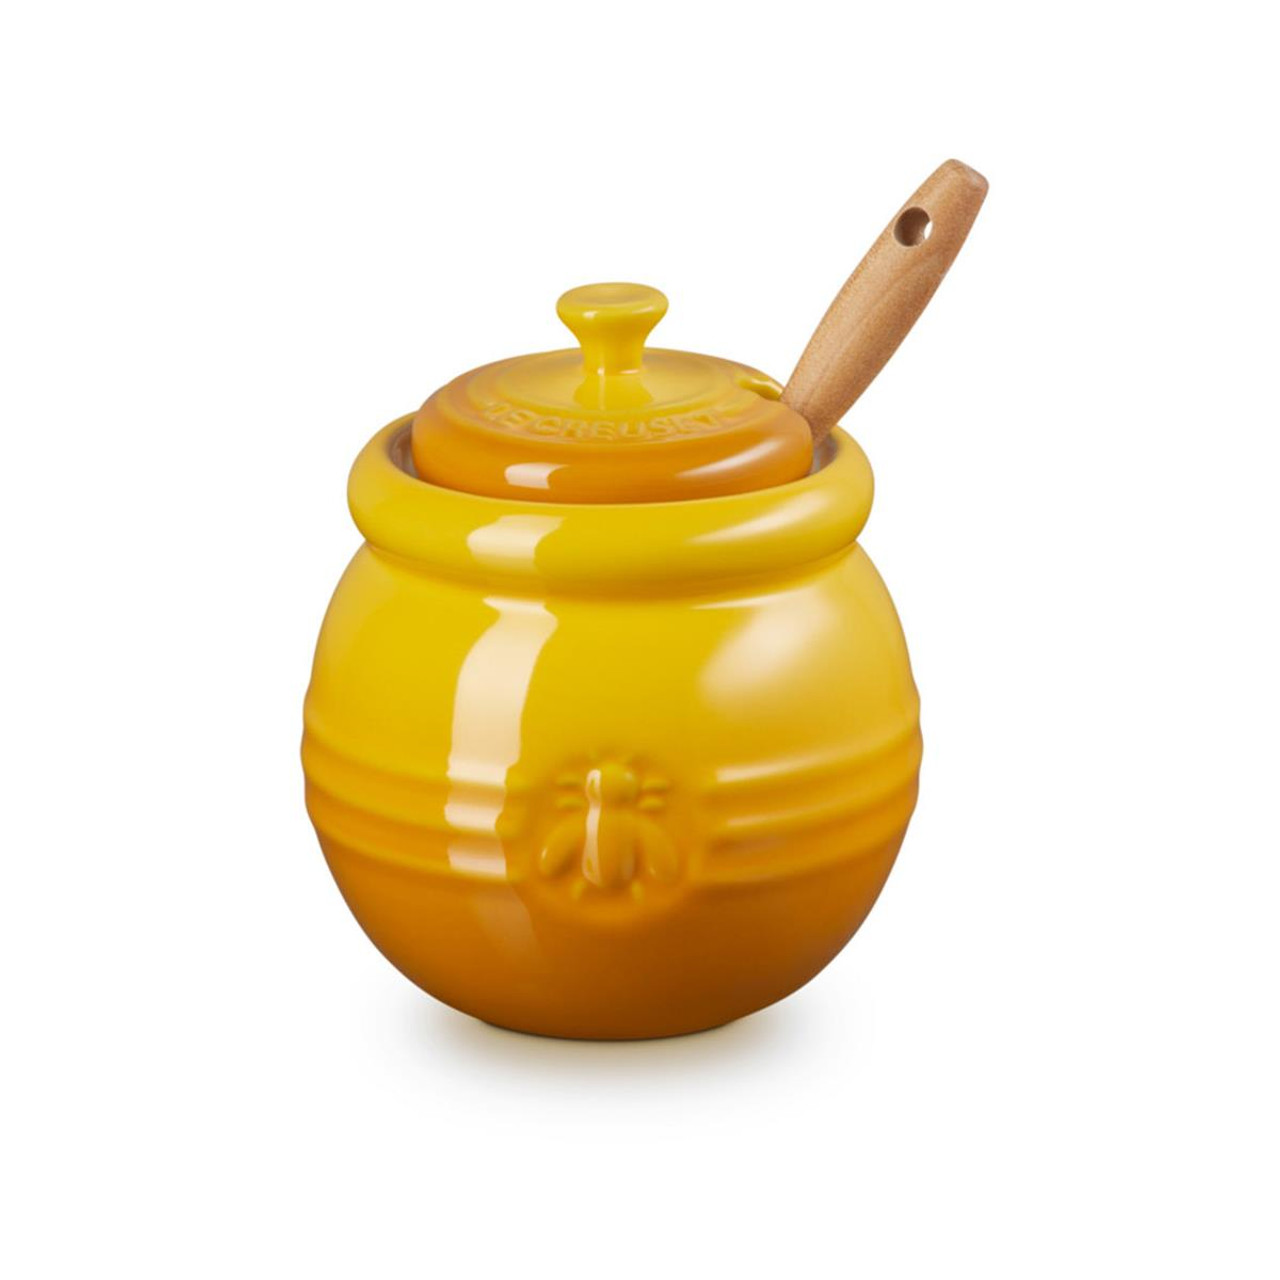 Can the le creuset honey pot be safely used in a dishwasher?